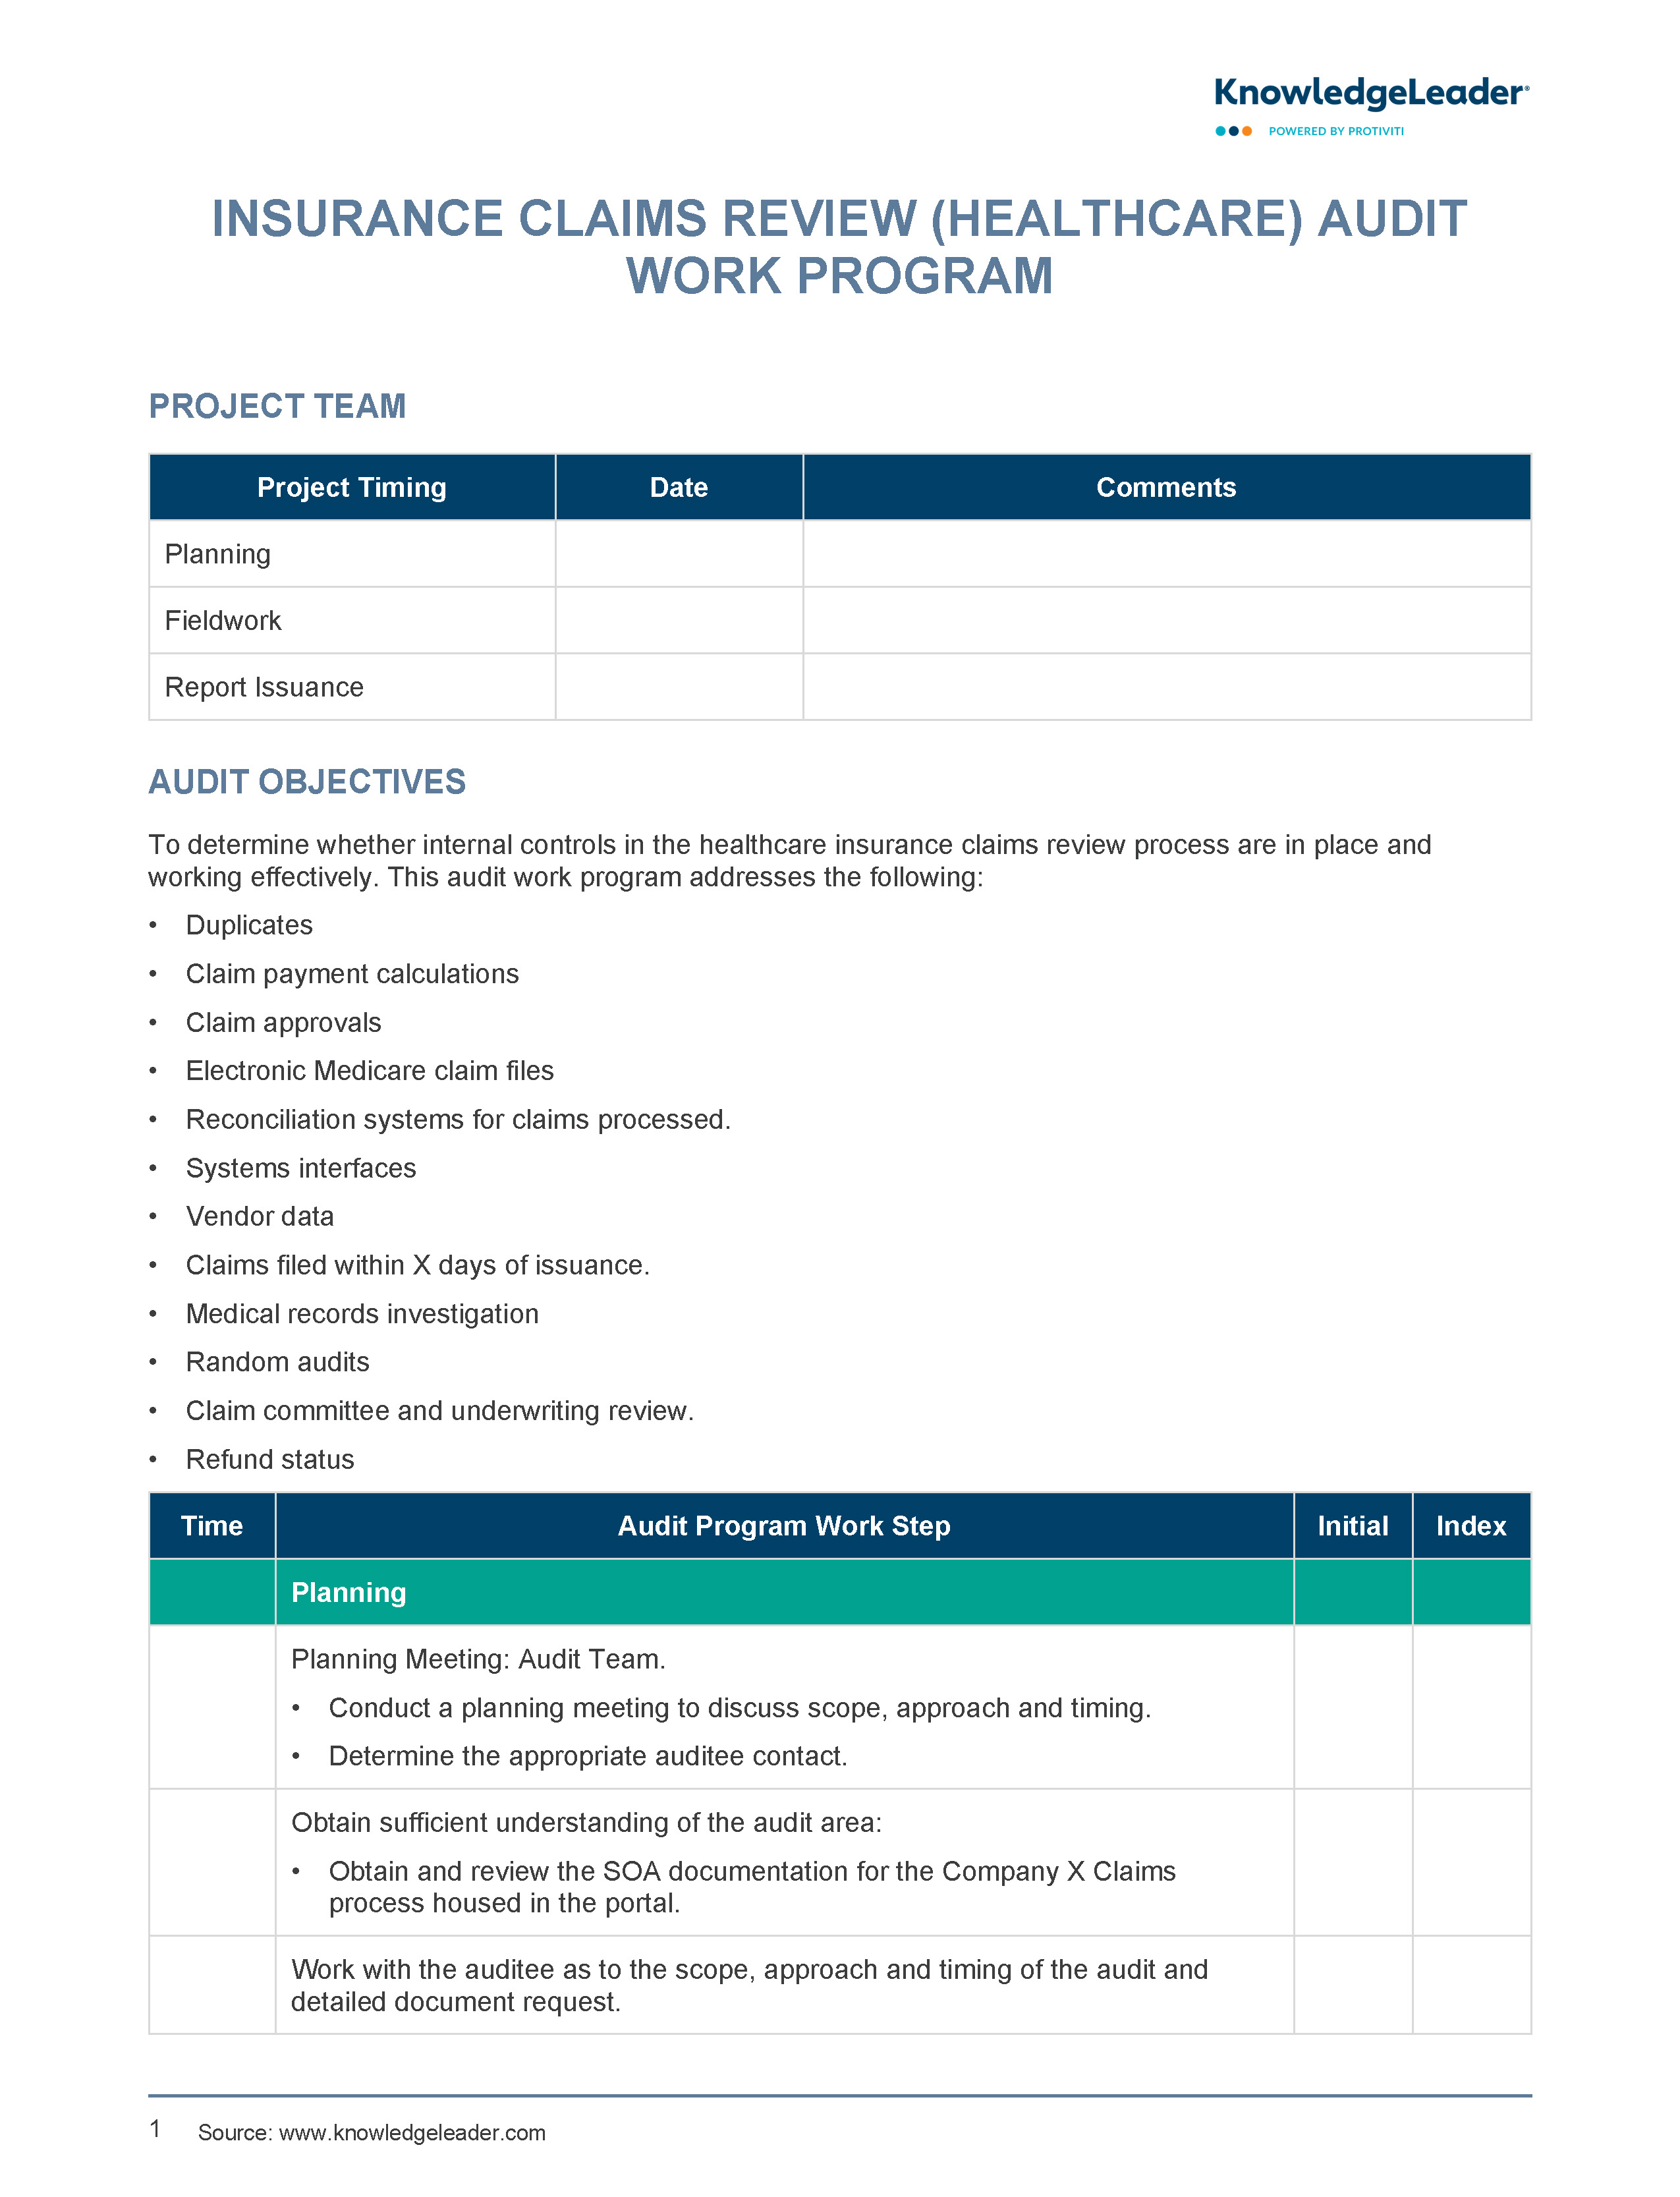 Screenshot of the first page of Insurance Claims Review (Healthcare) Audit Work Program